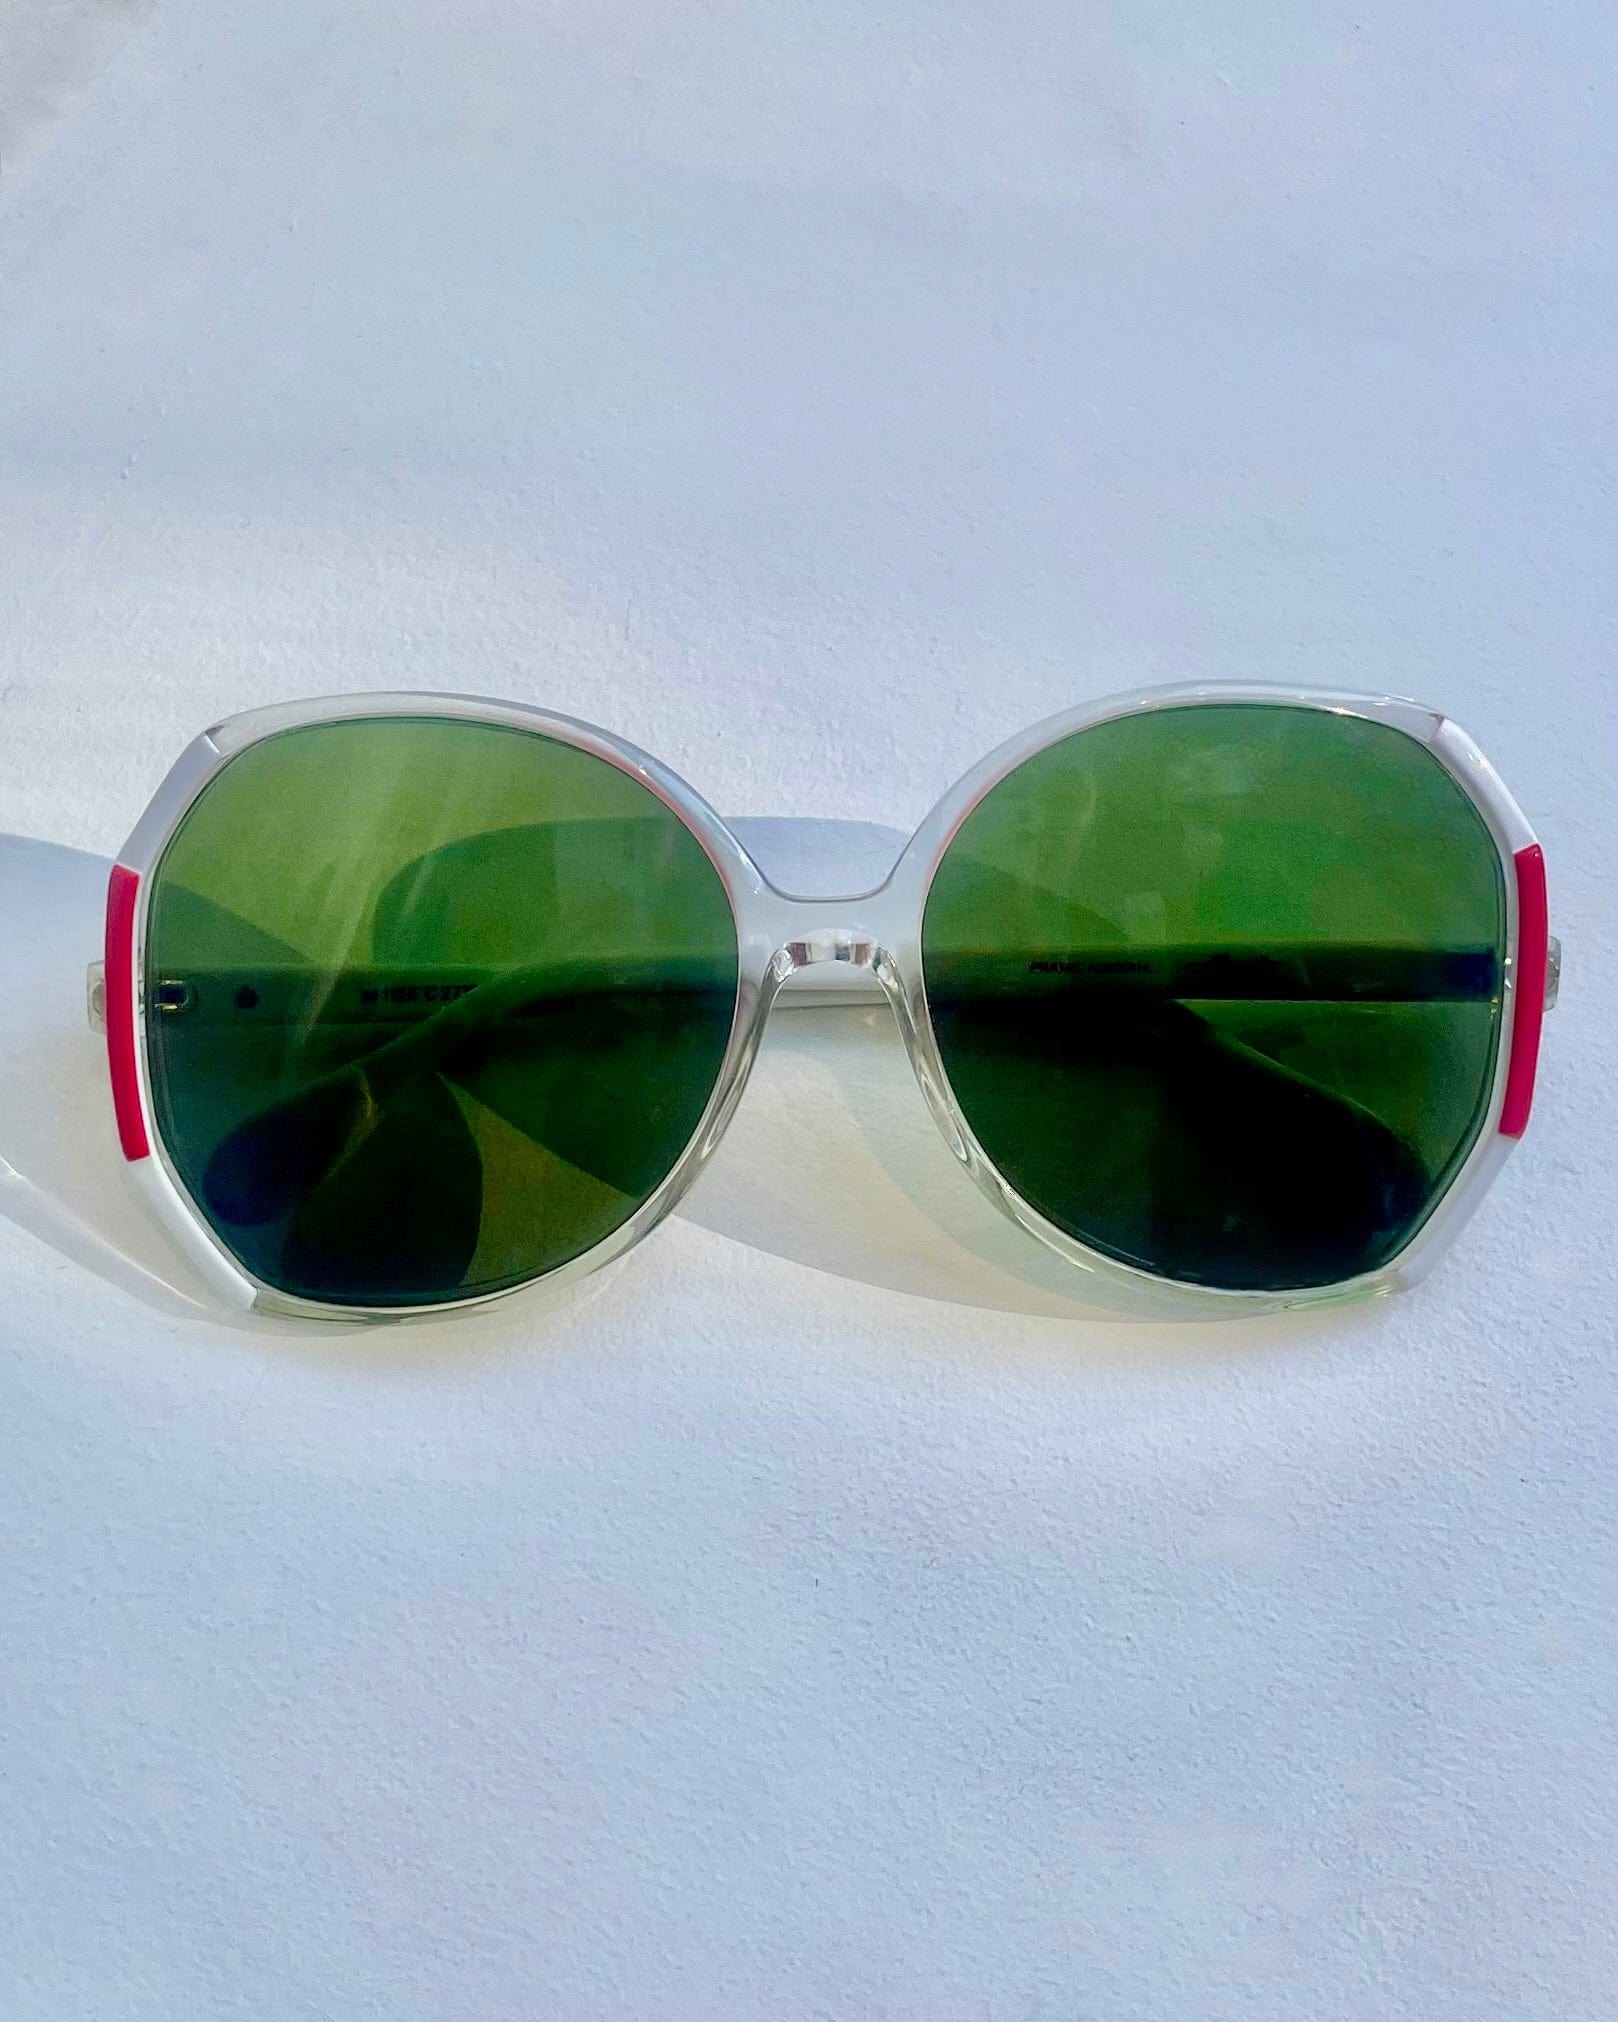 Red/White Silhouette 80s Vintage Sunglasses Accessories Vintage Shades   